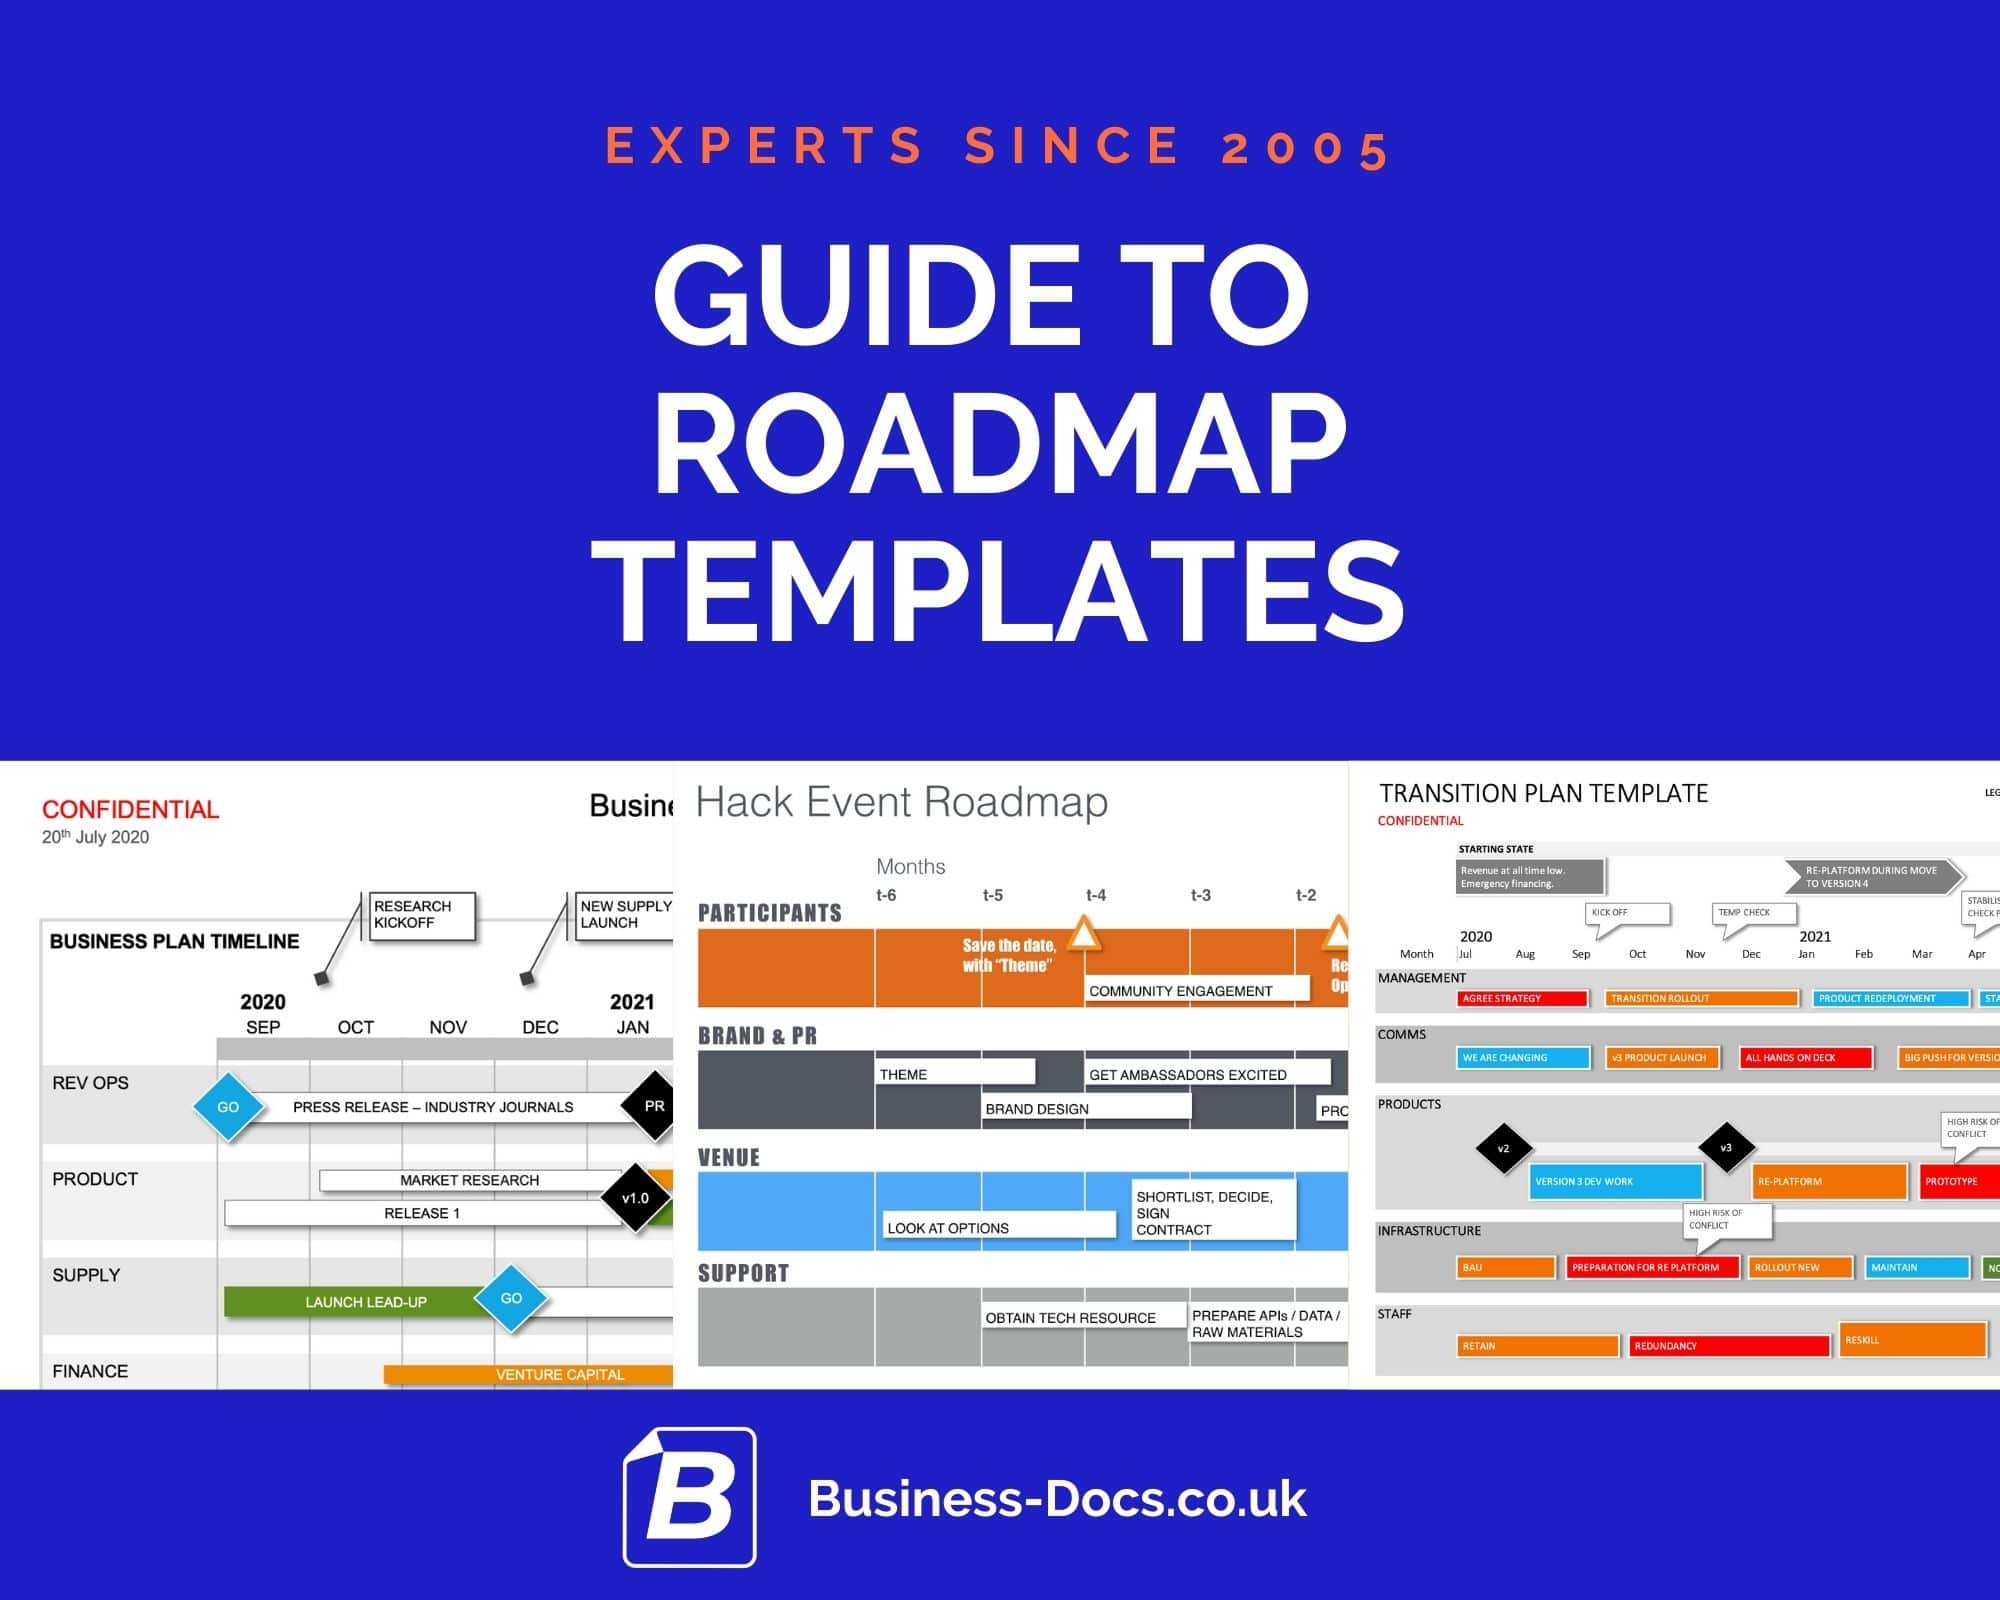 Guide to Roadmap Templates 2022